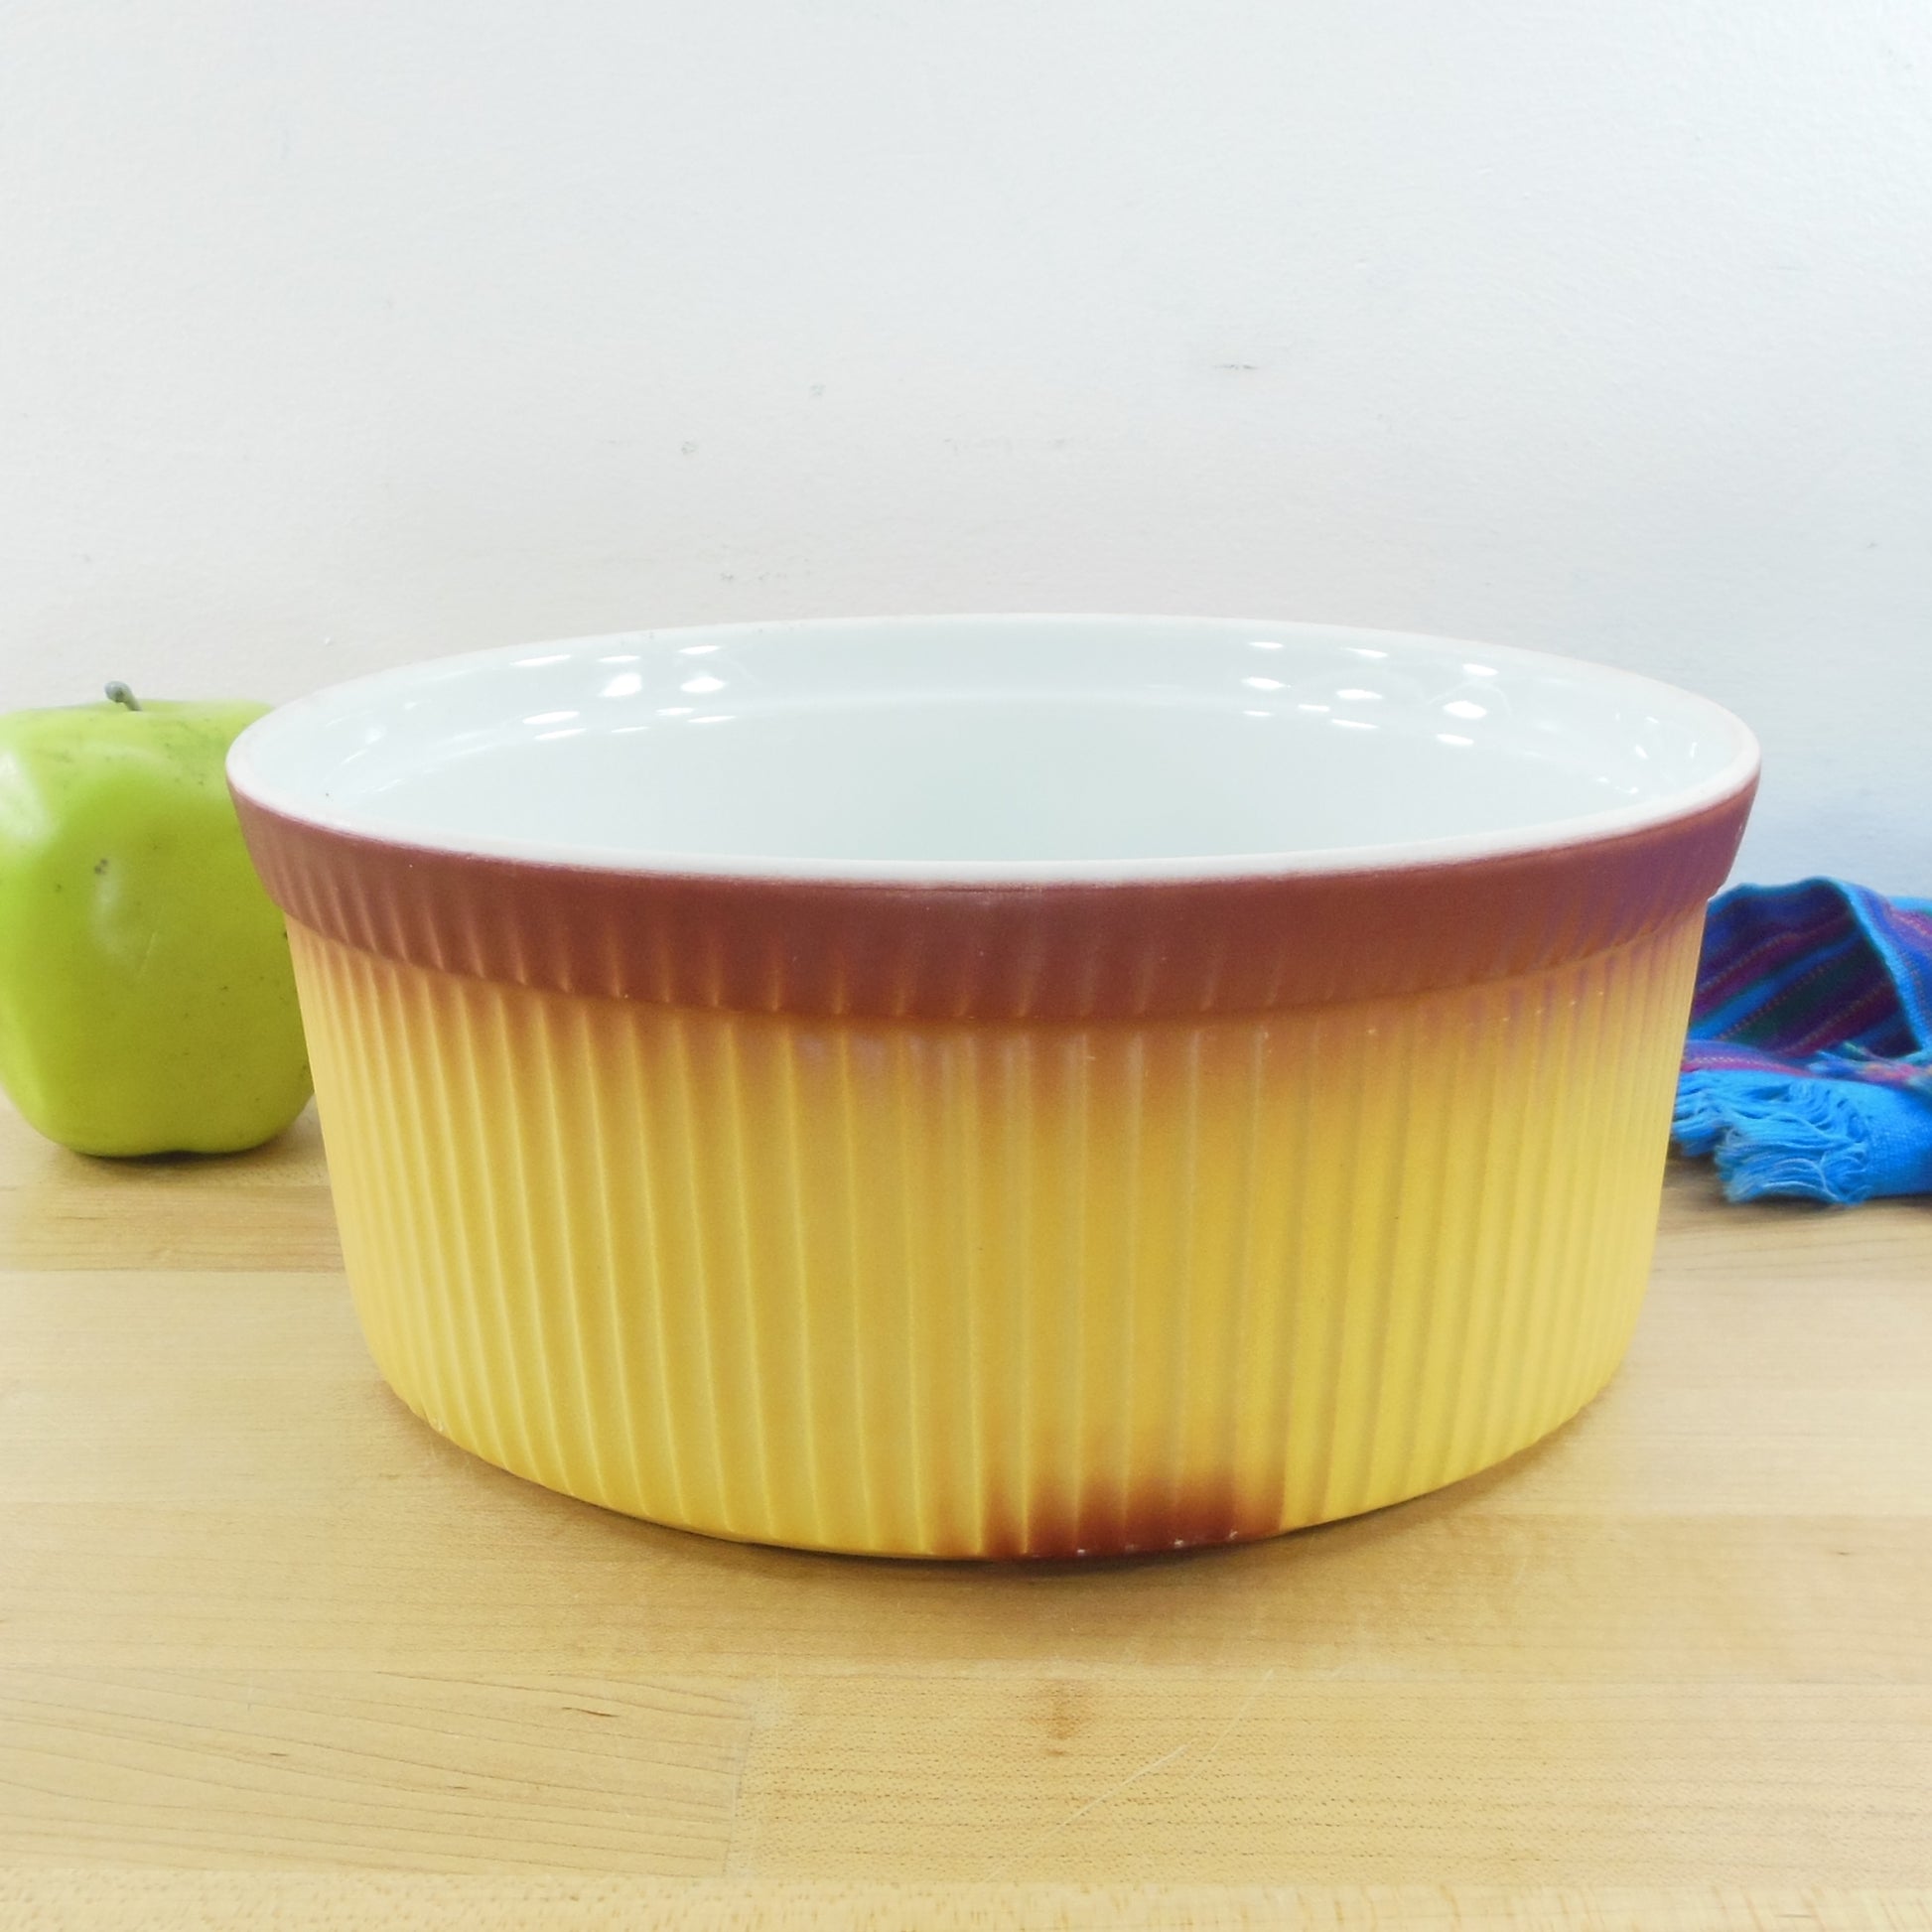 Apilco France Ribbed Porcelain Souffle Dish Yellow Brown 2 Quart